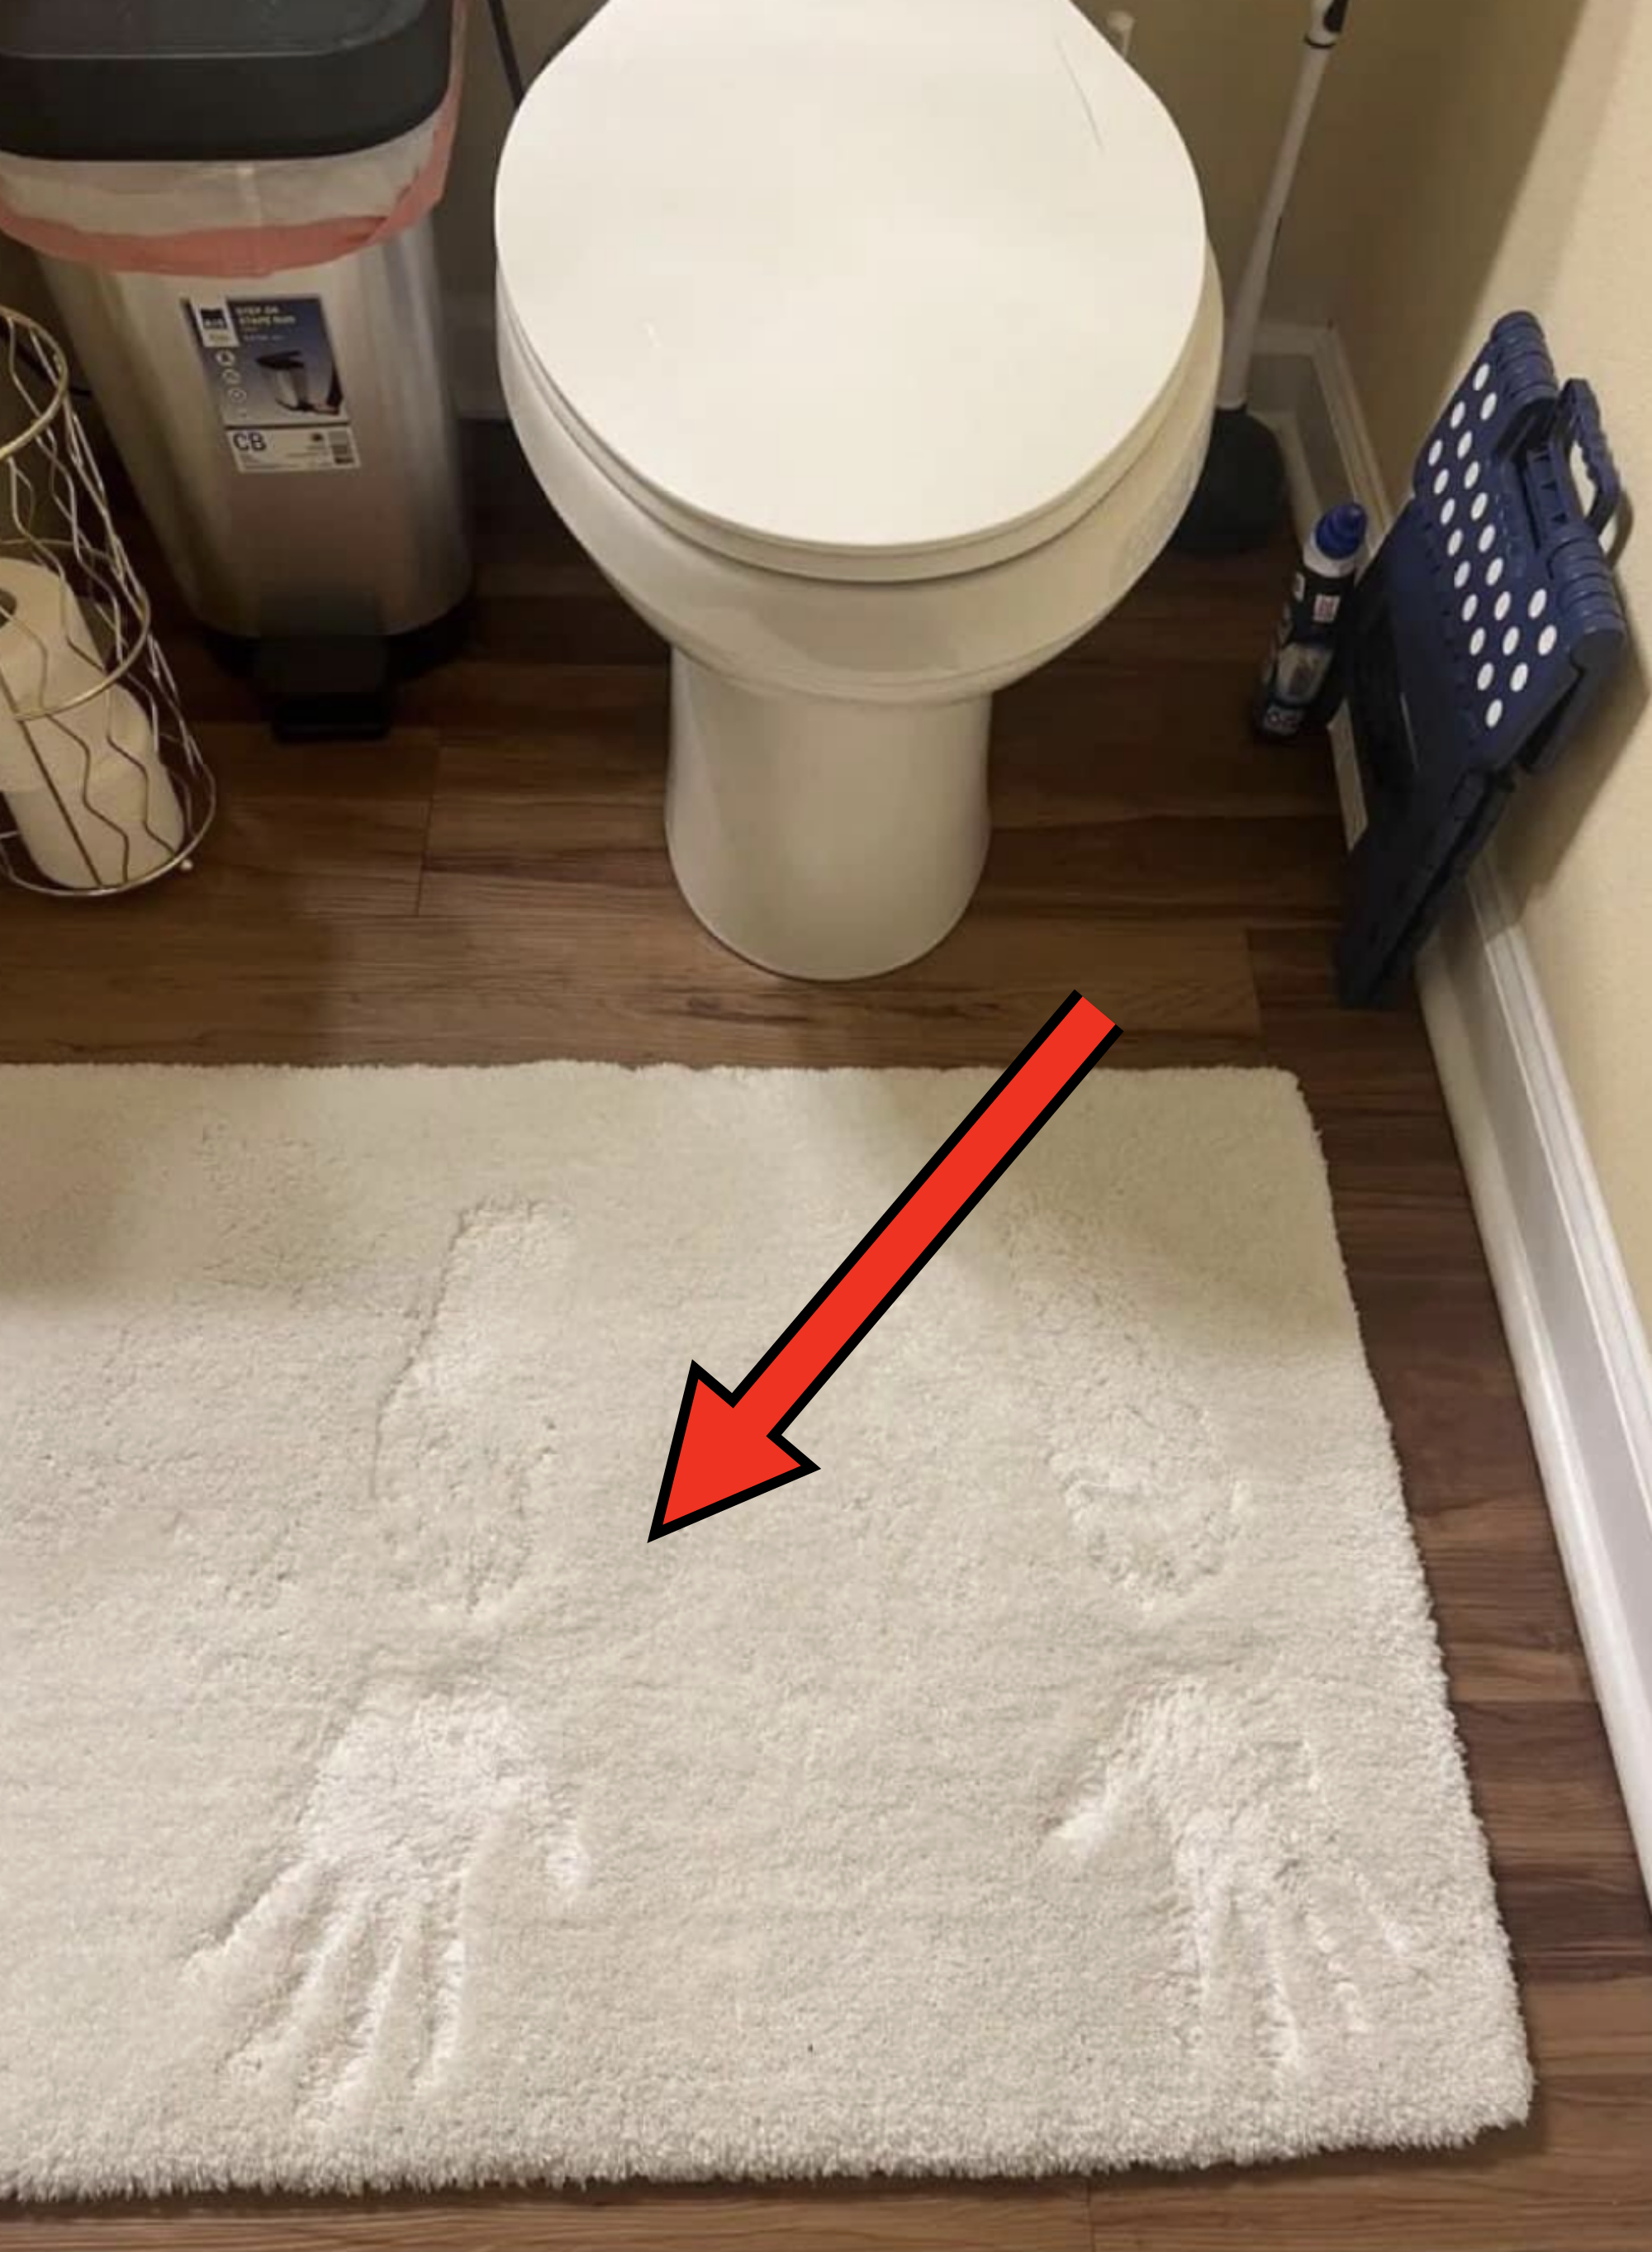 Bathroom mat with imprinted cat-like shape, positioned in front of a toilet, near a waste bin and plunger